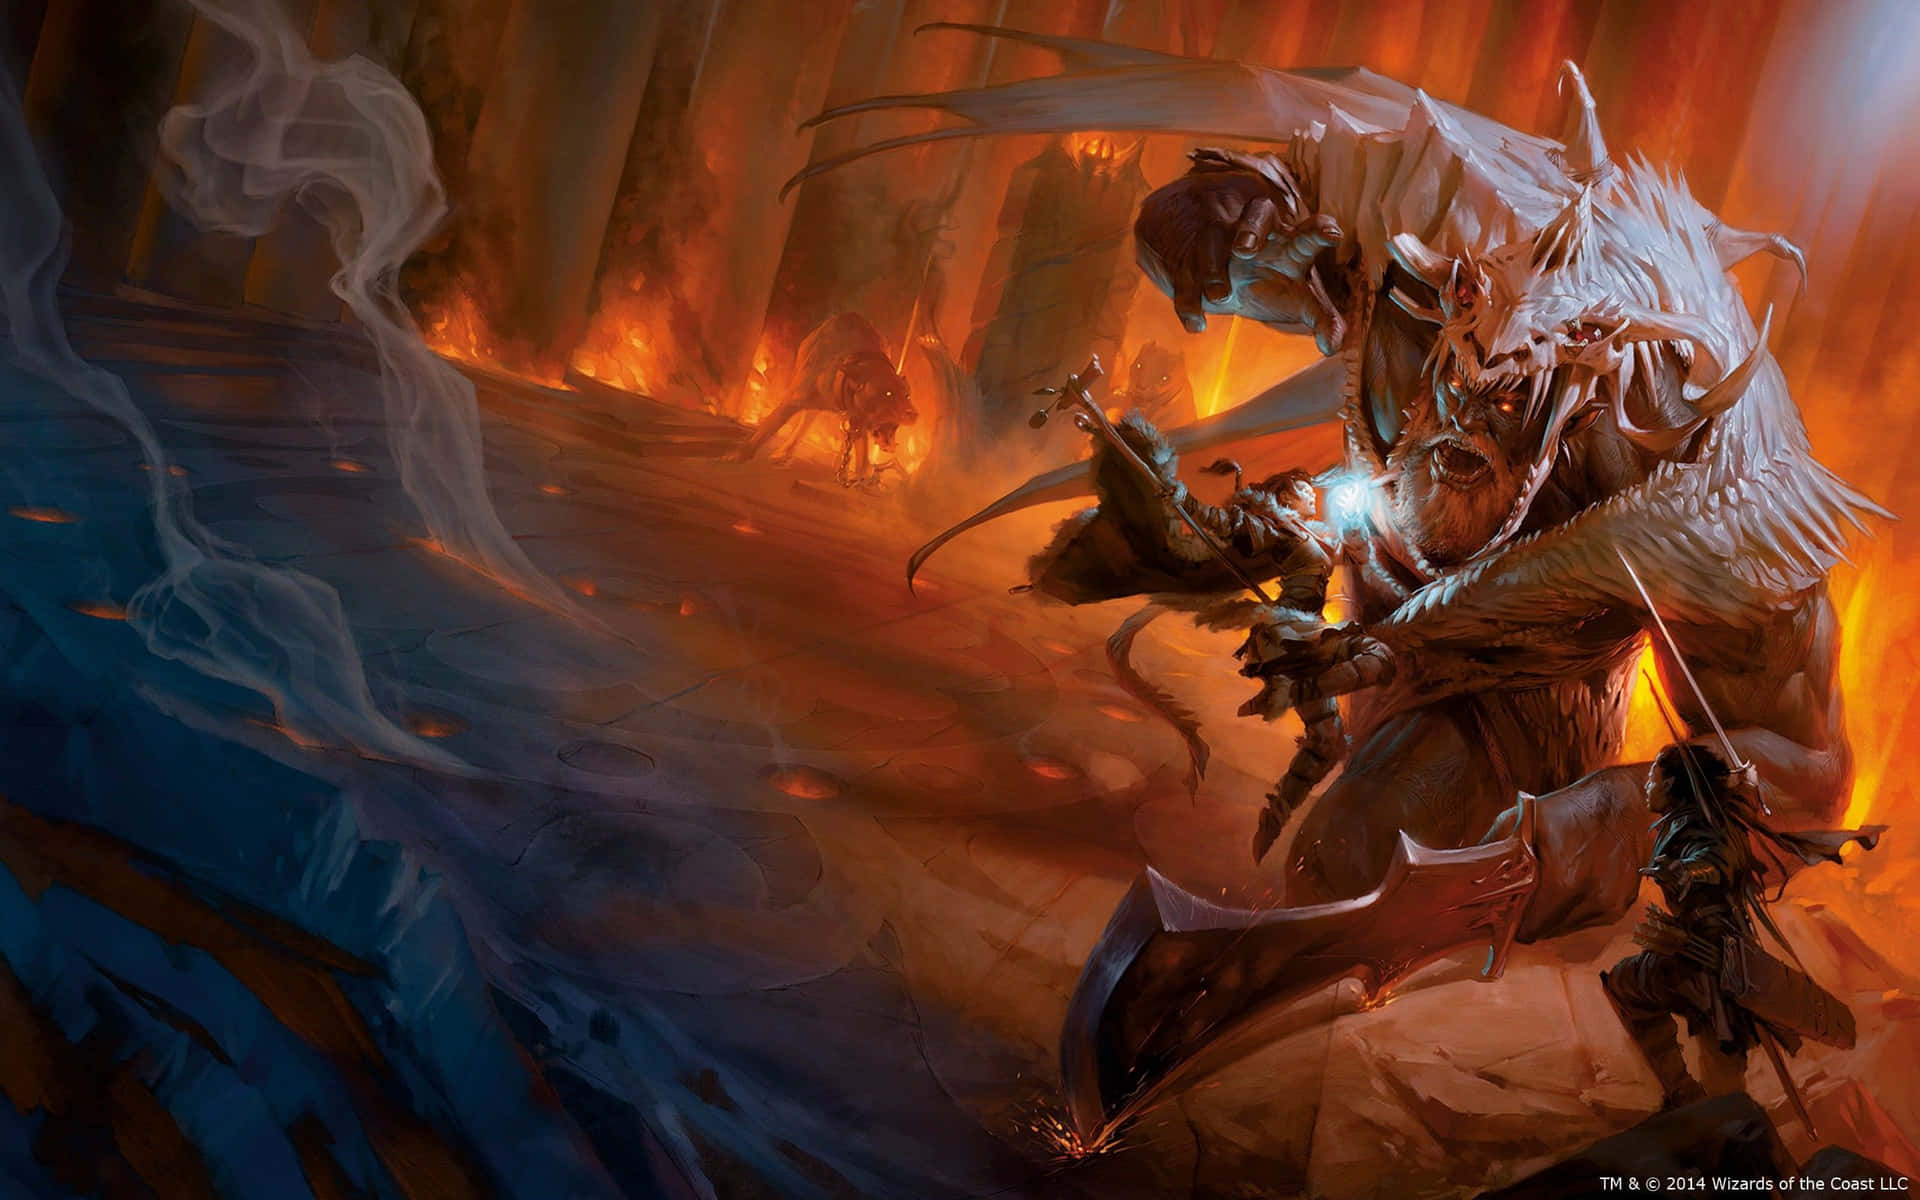 Epic adventure awaits in the world of Dungeons and Dragons